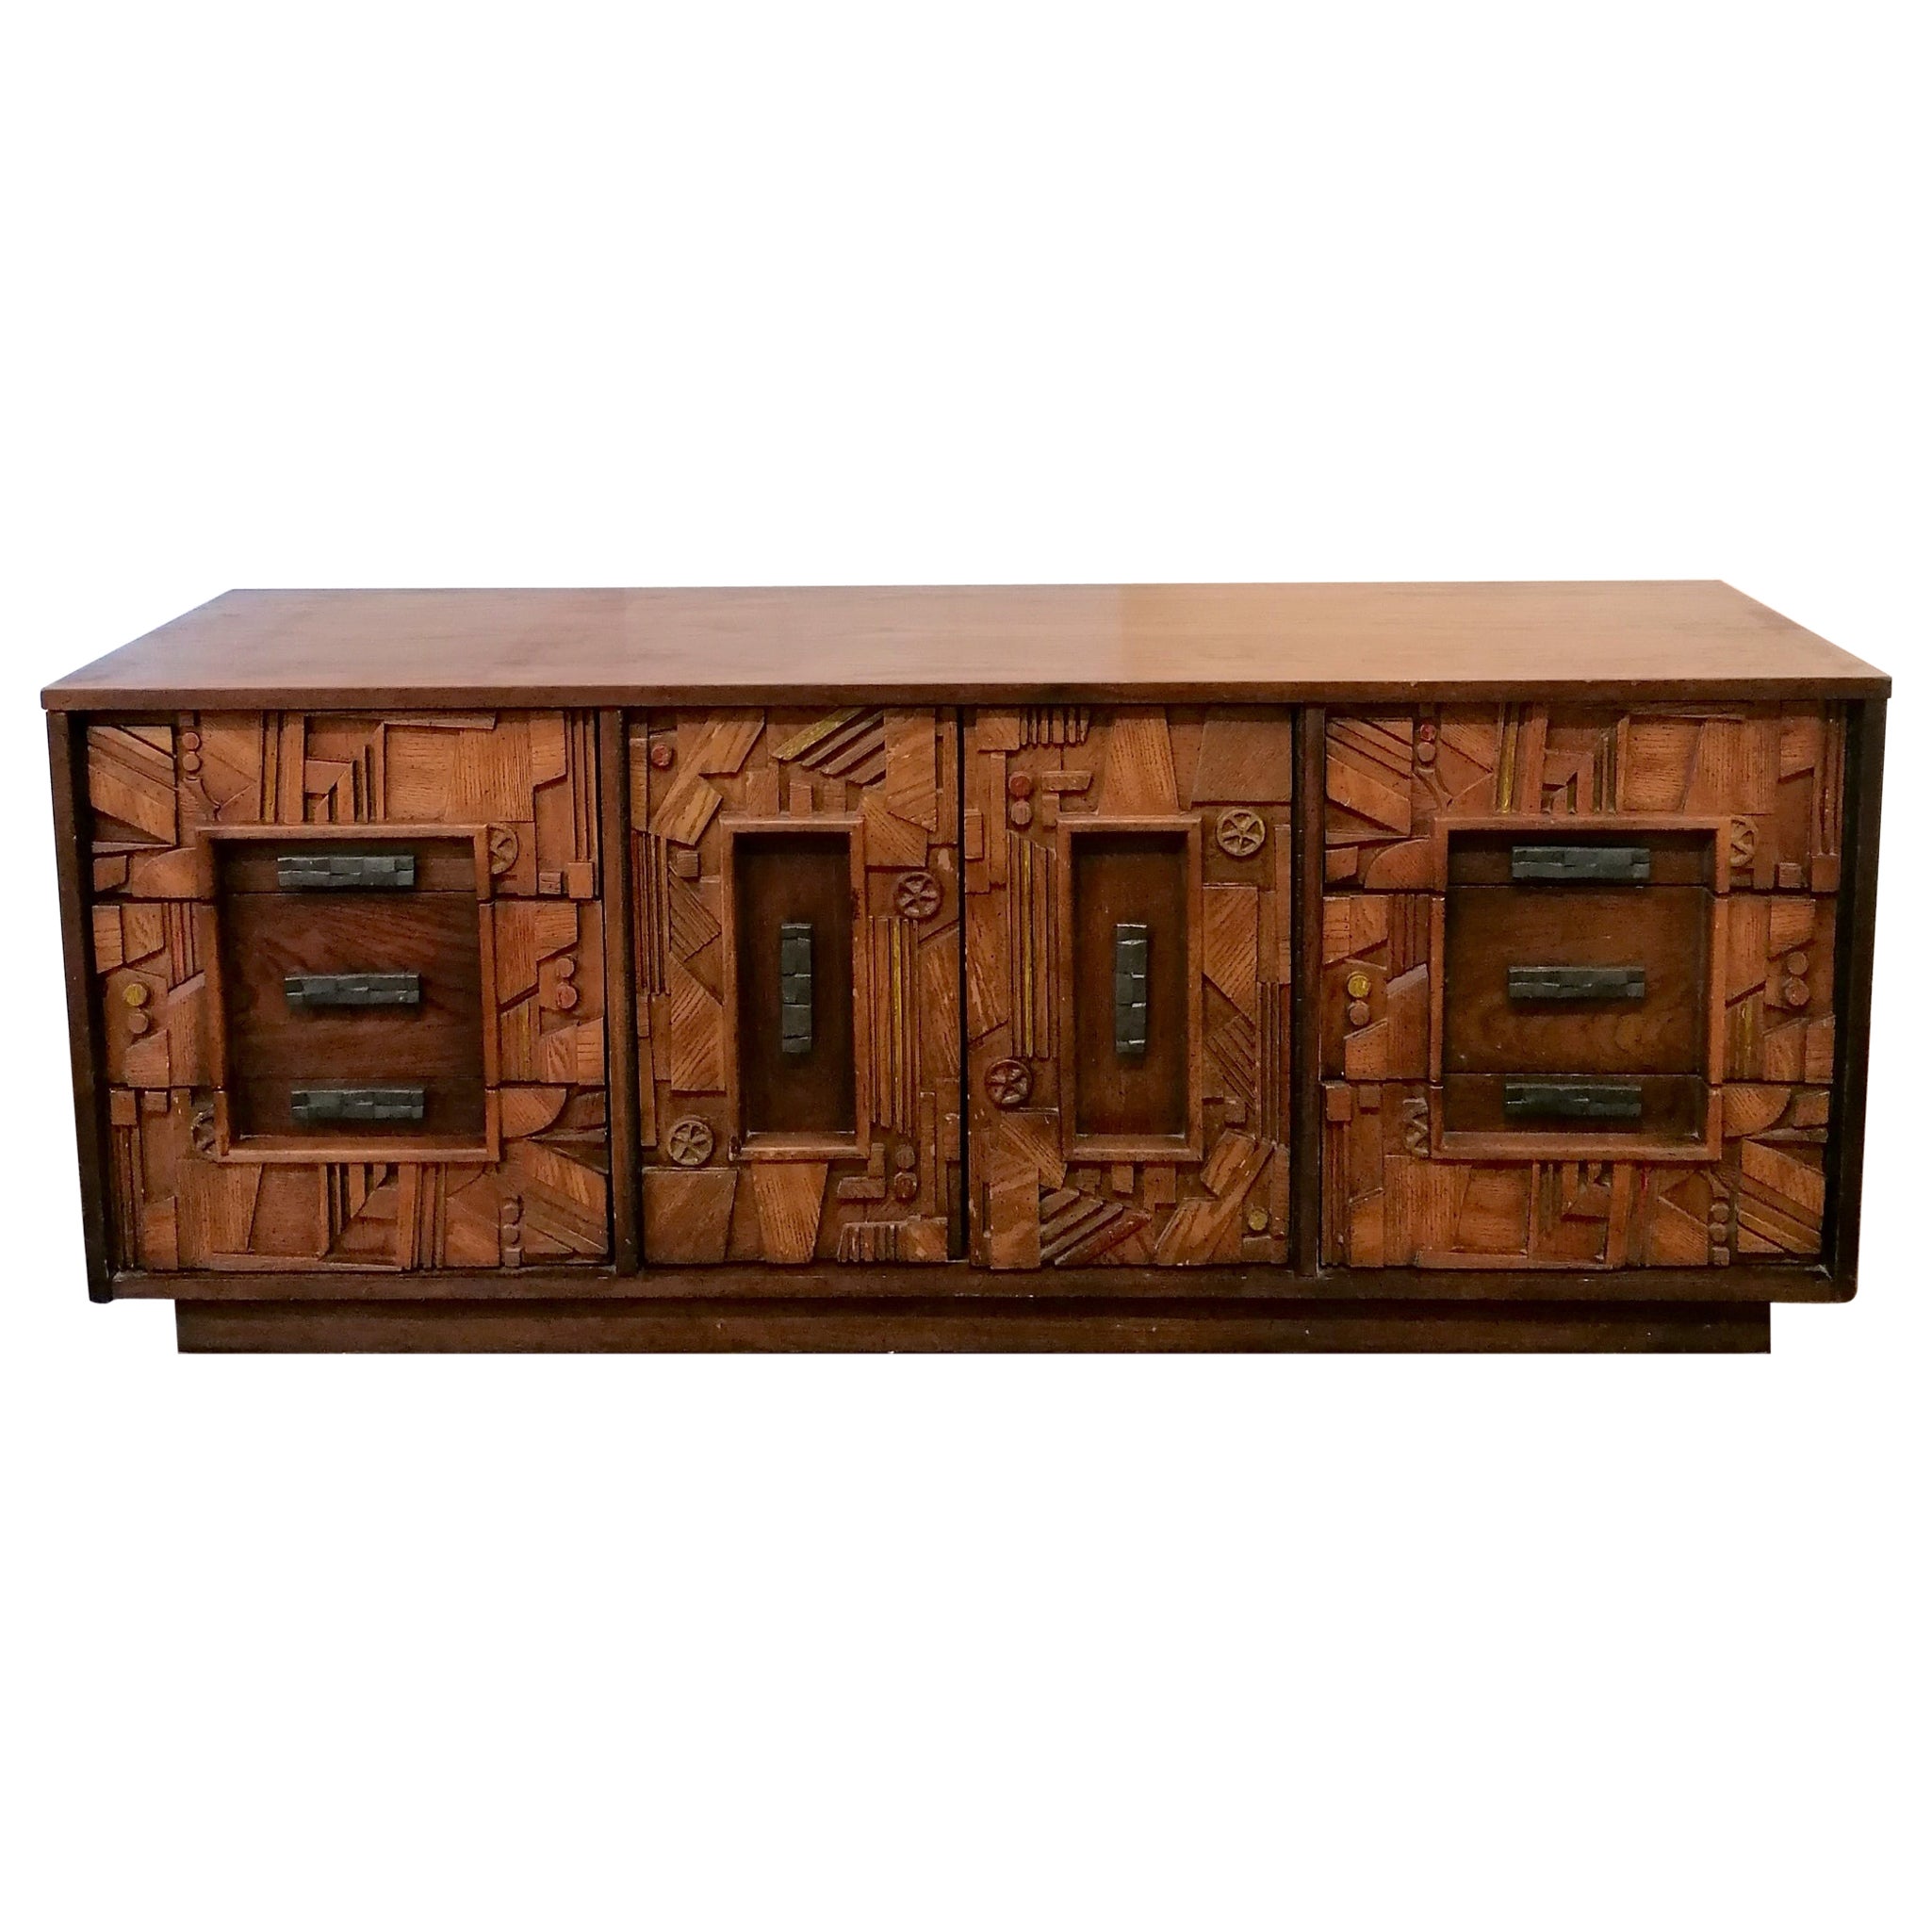 Rare 1970s American brutalist sideboard with drawers, probably by Lane Furniture